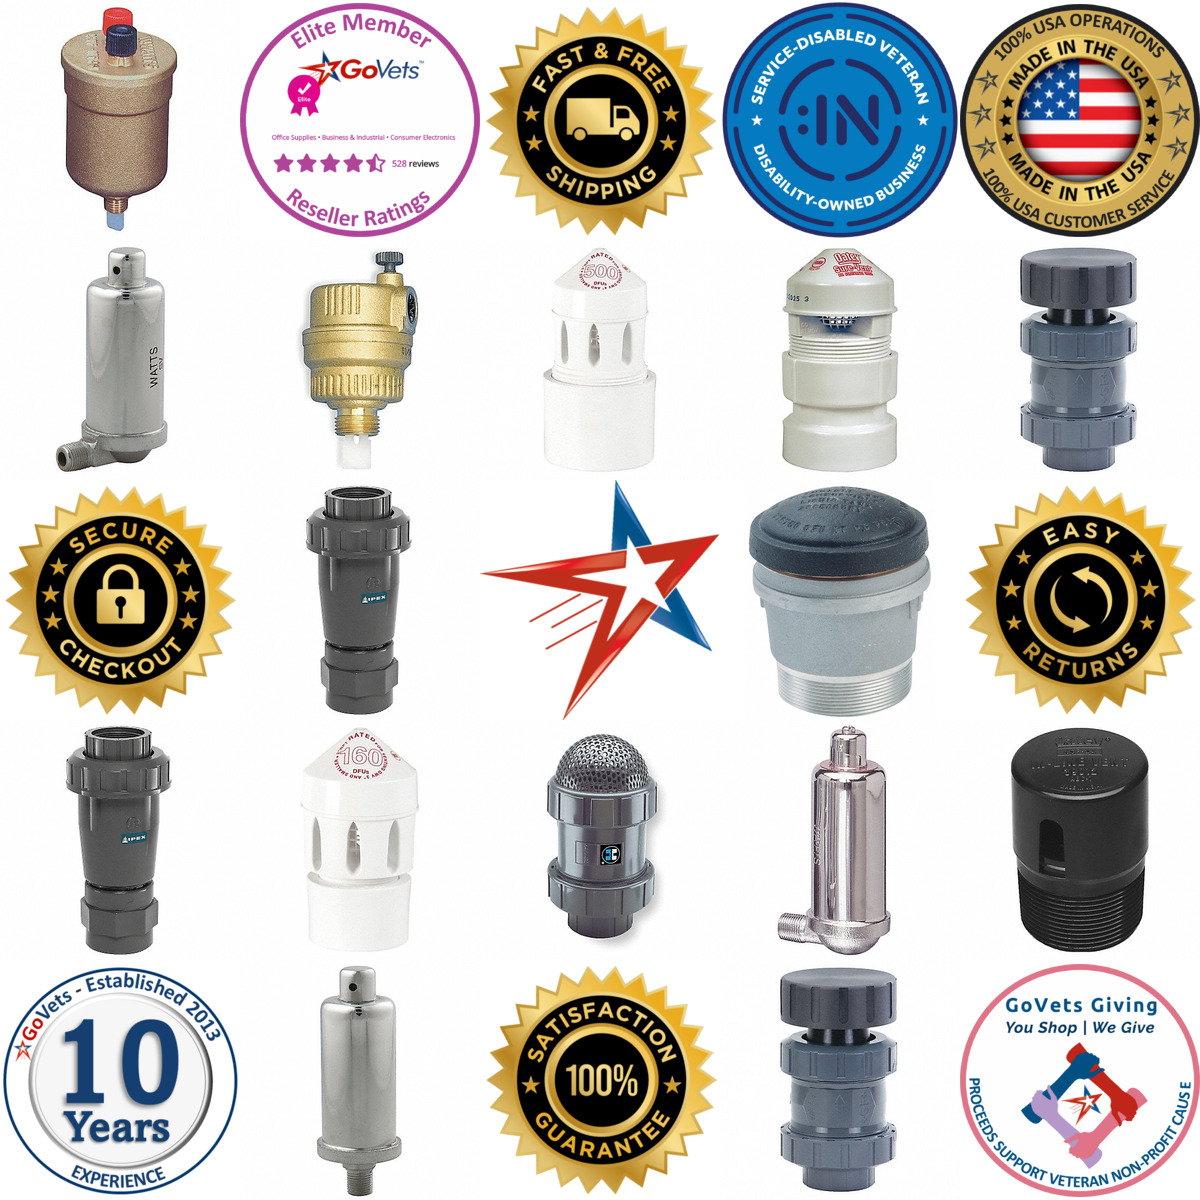 A selection of Vent Valves products on GoVets